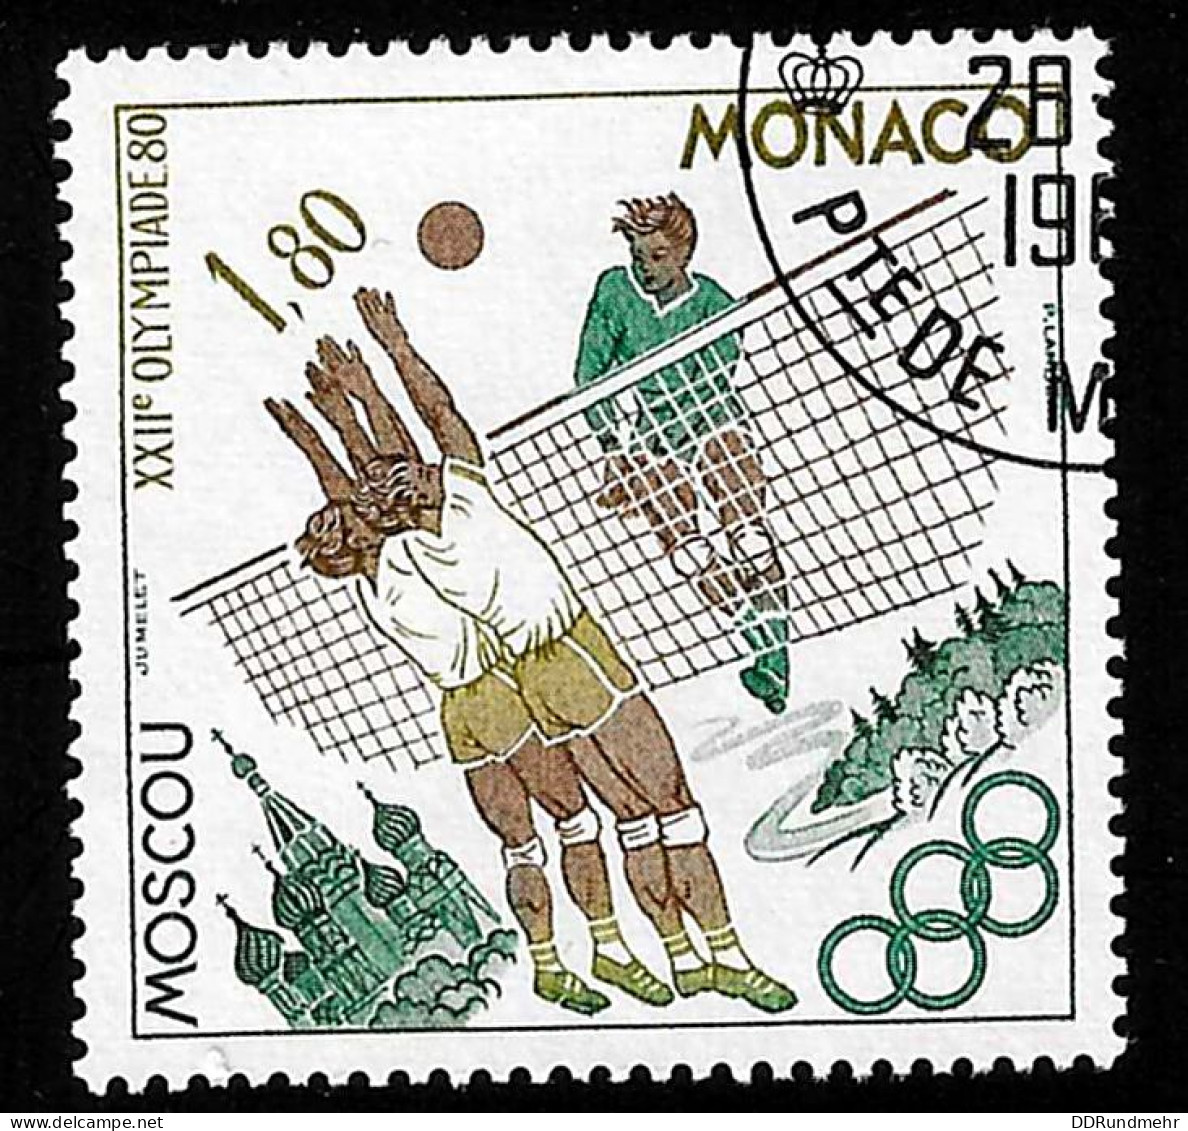 1980  Volleyball Michel MC 1418 Stamp Number MC 1224 Yvert Et Tellier MC 1221 Stanley Gibbons MC 1438 Used - Used Stamps